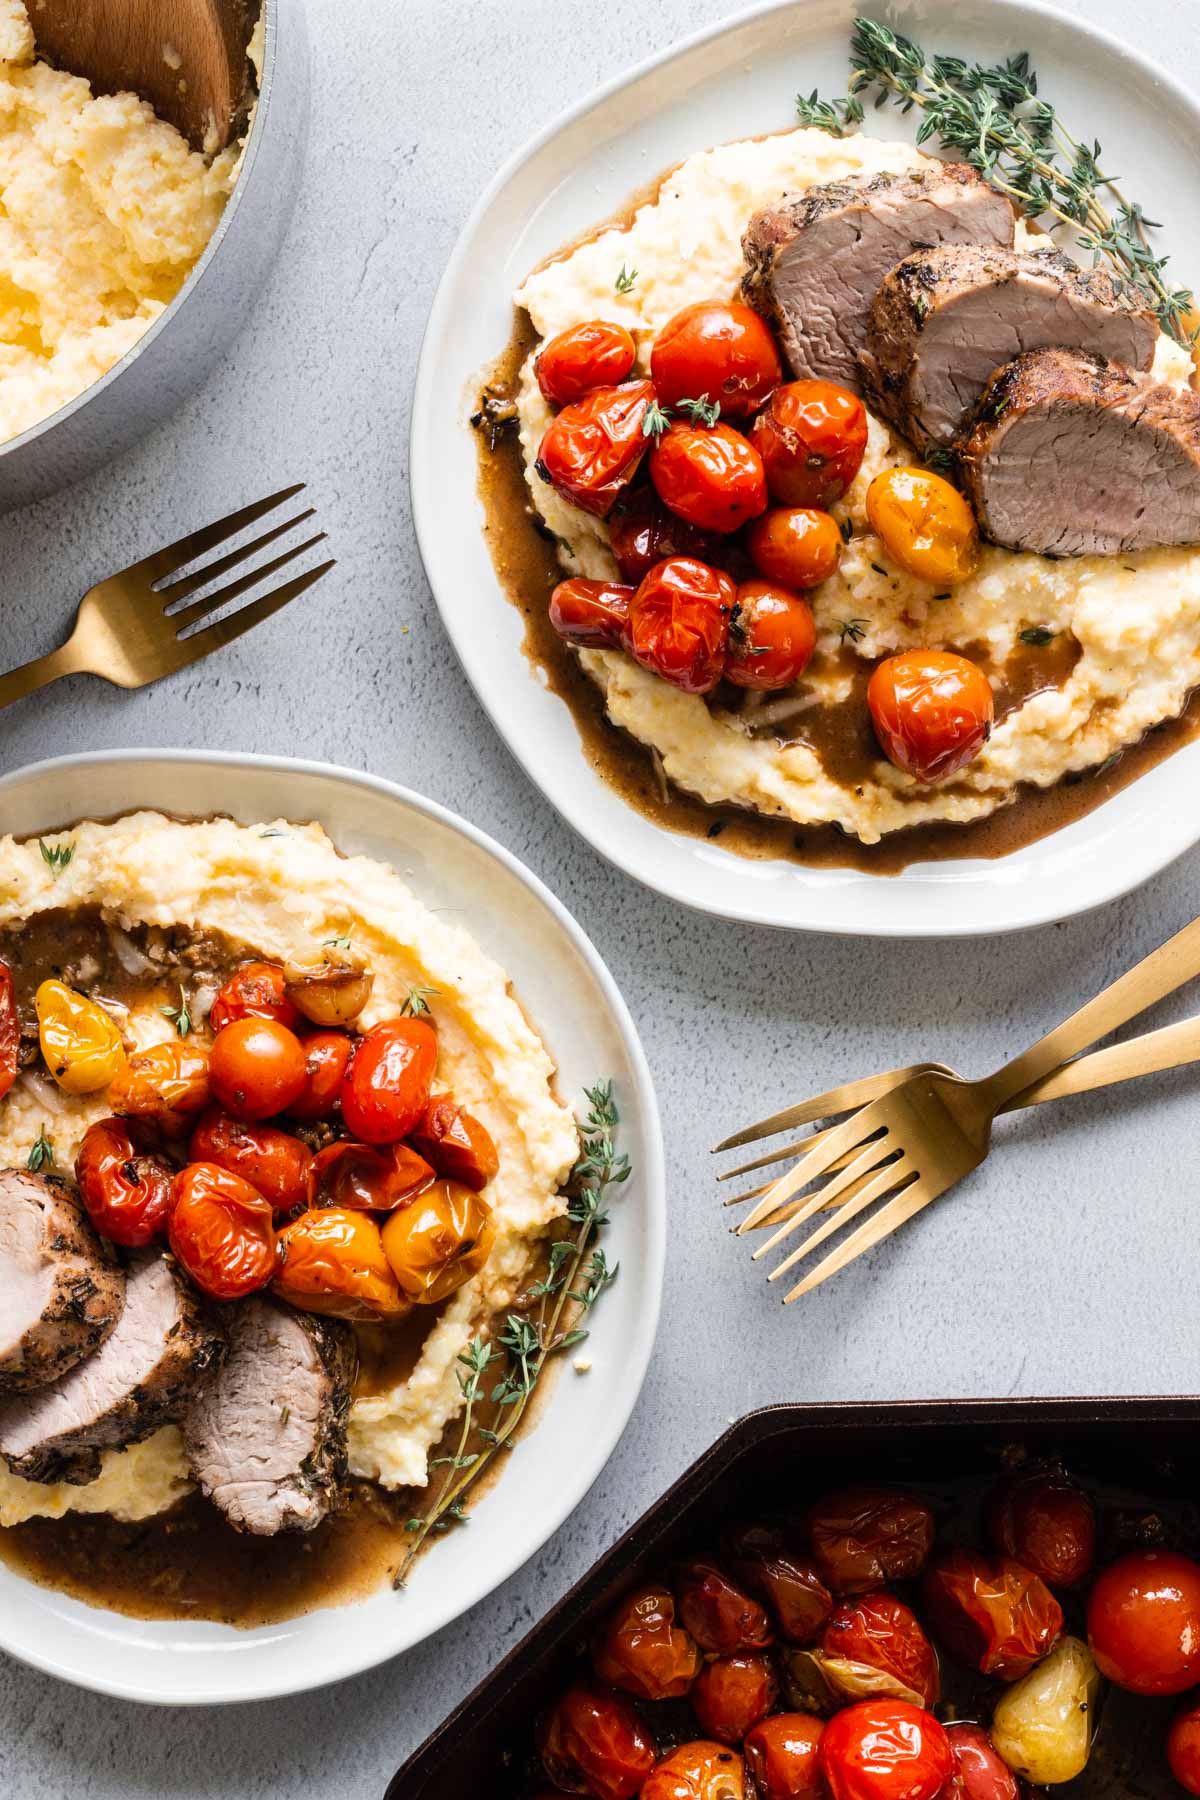 Herb crusted pork tenderloin with creamy polenta and cherry tomatoes